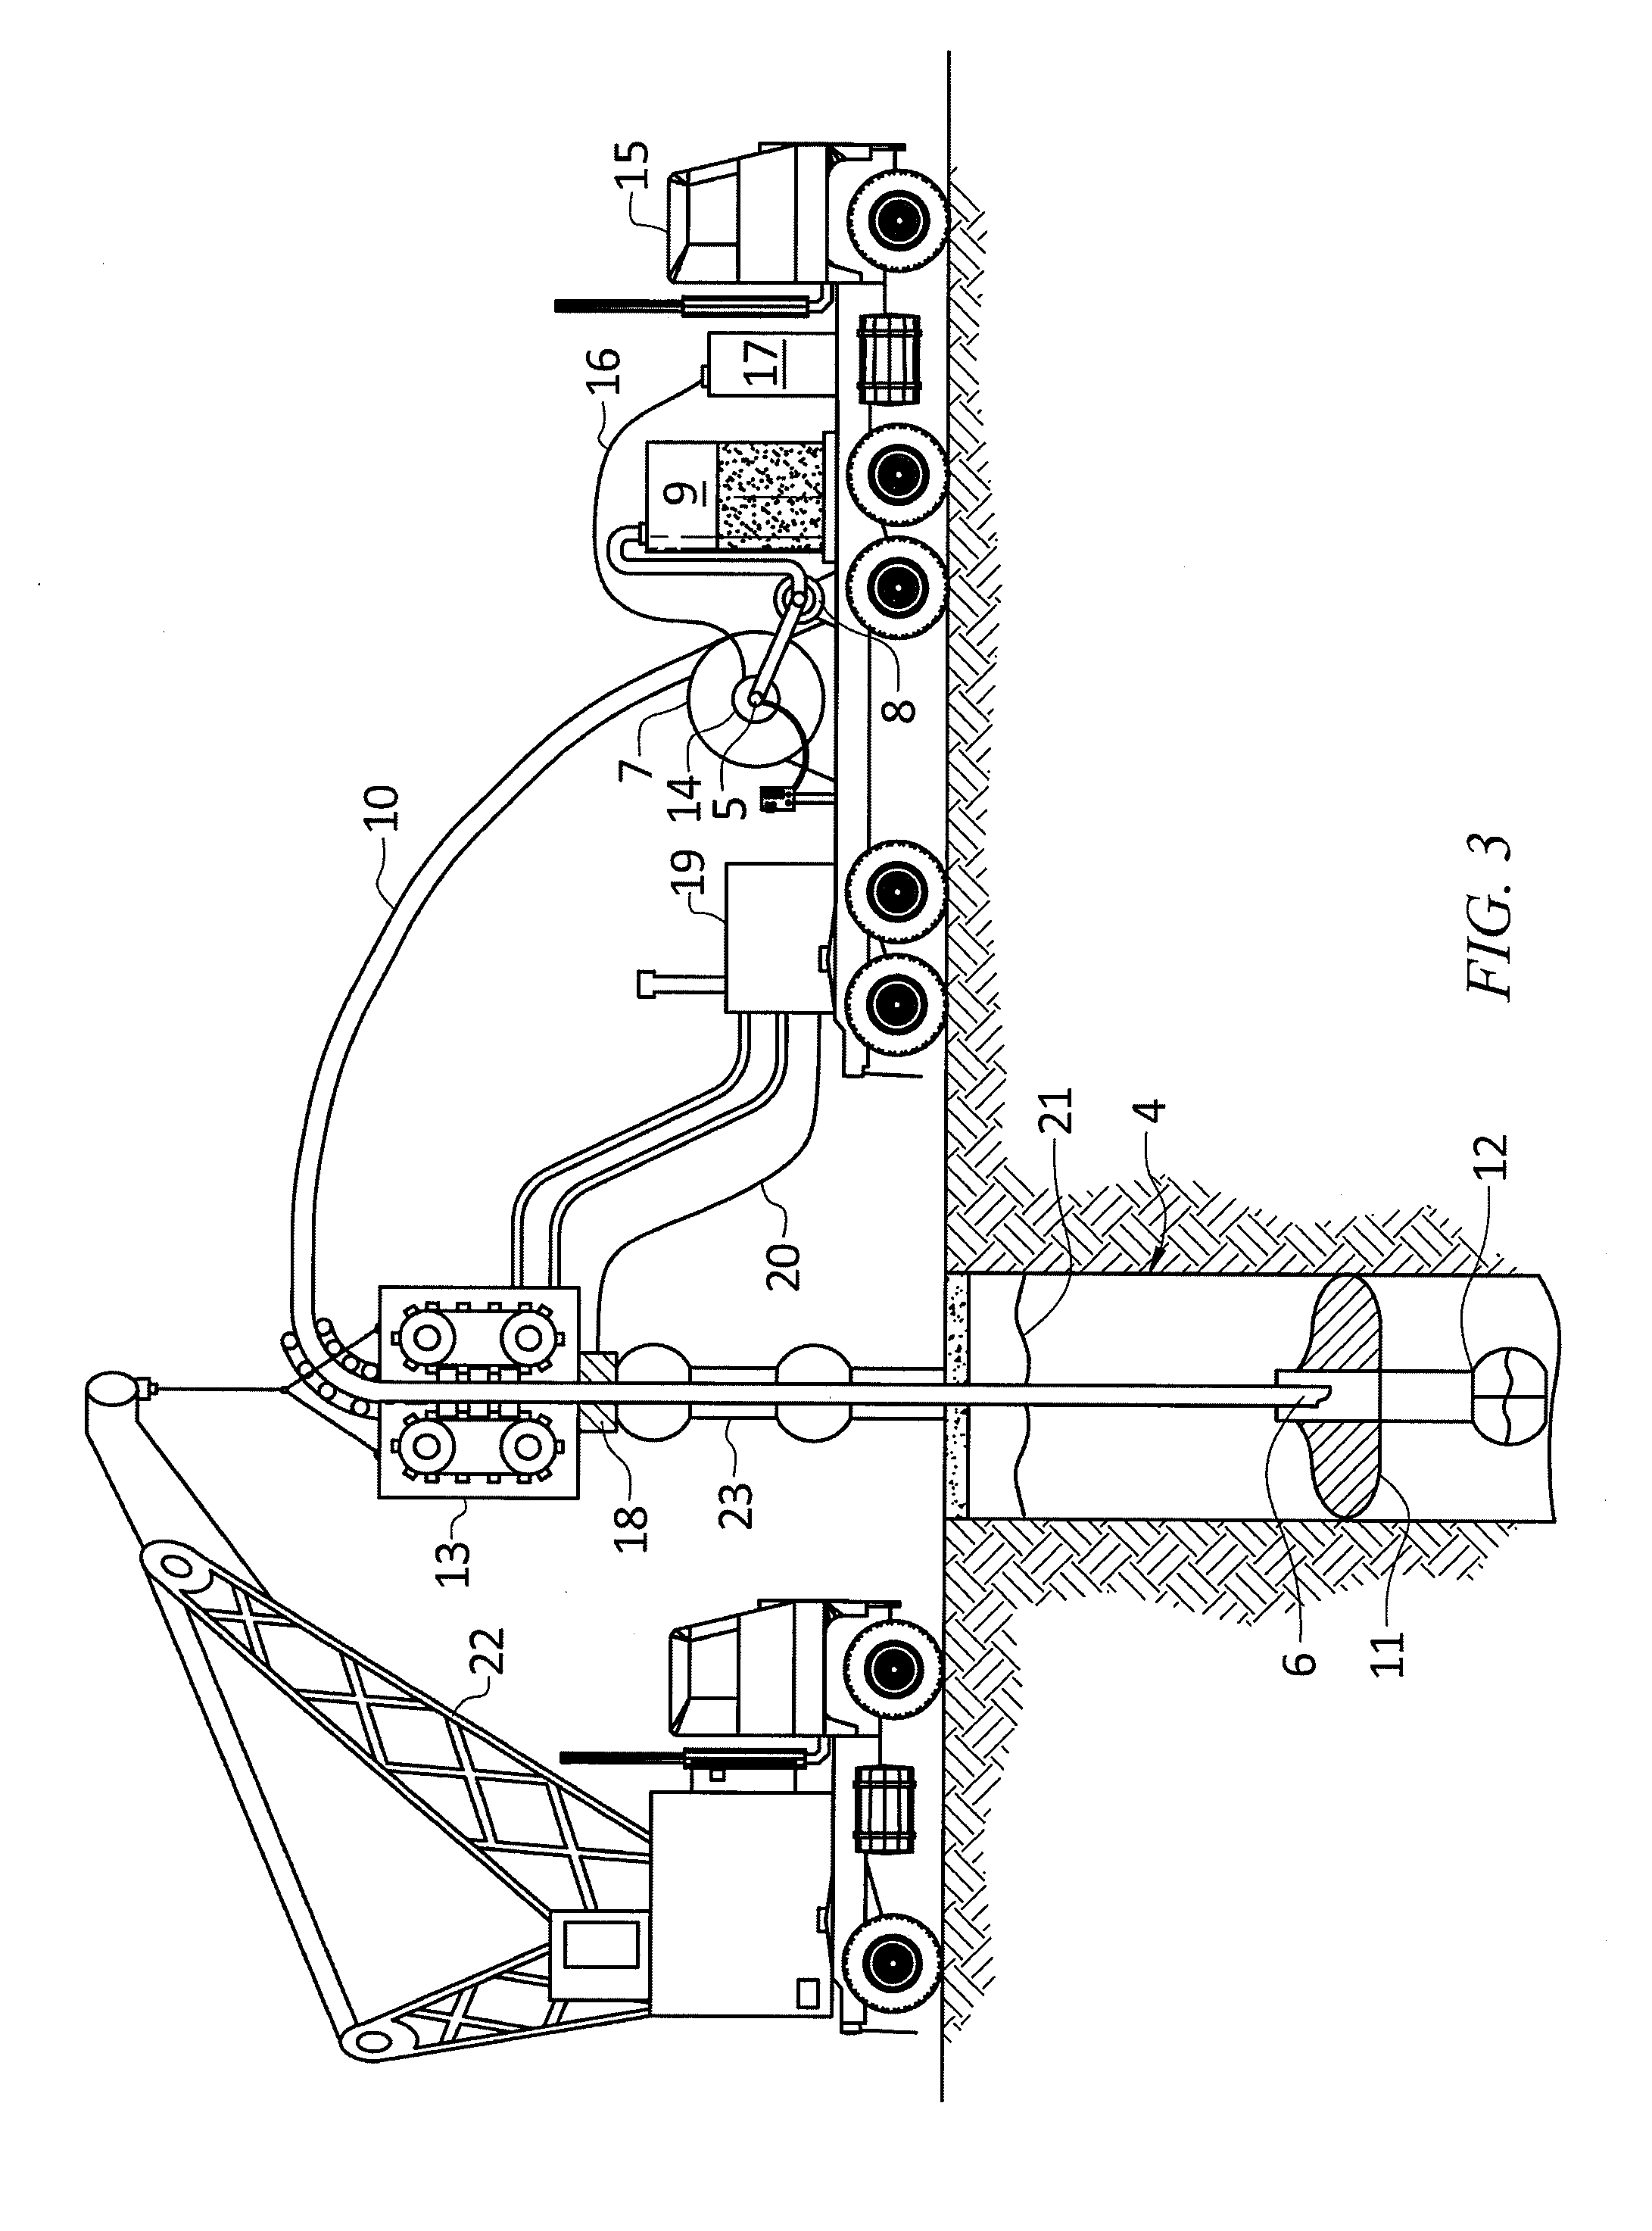 Method and apparatus for a subterranean and marine-submersible electrical transmission system for oil and gas wells